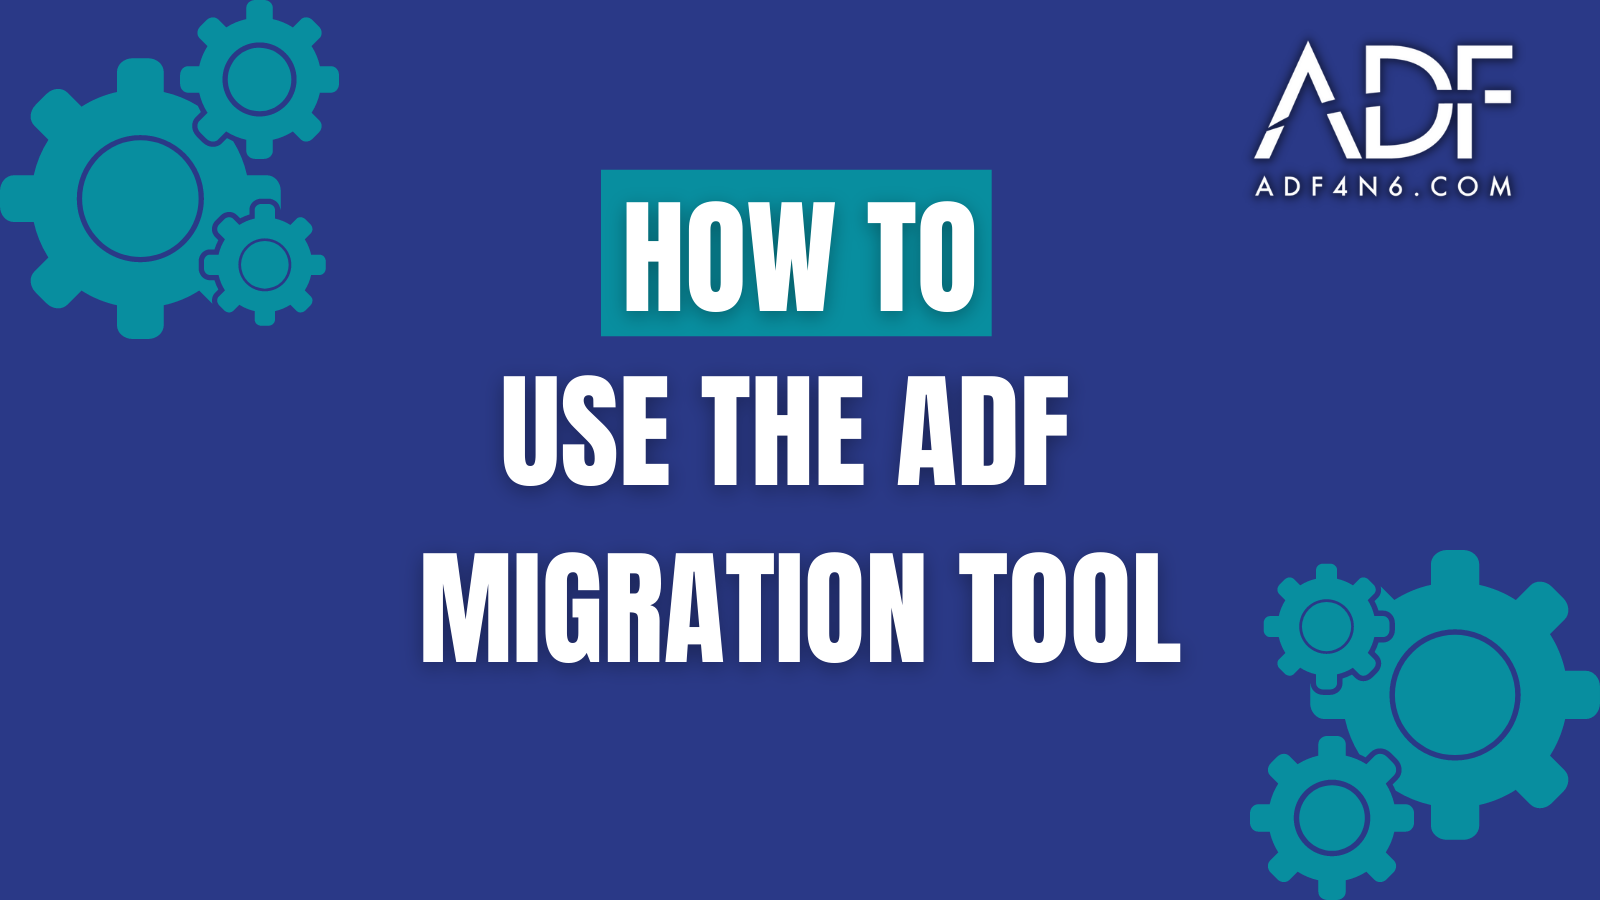 Transferring Data With the ADF Migration Tool